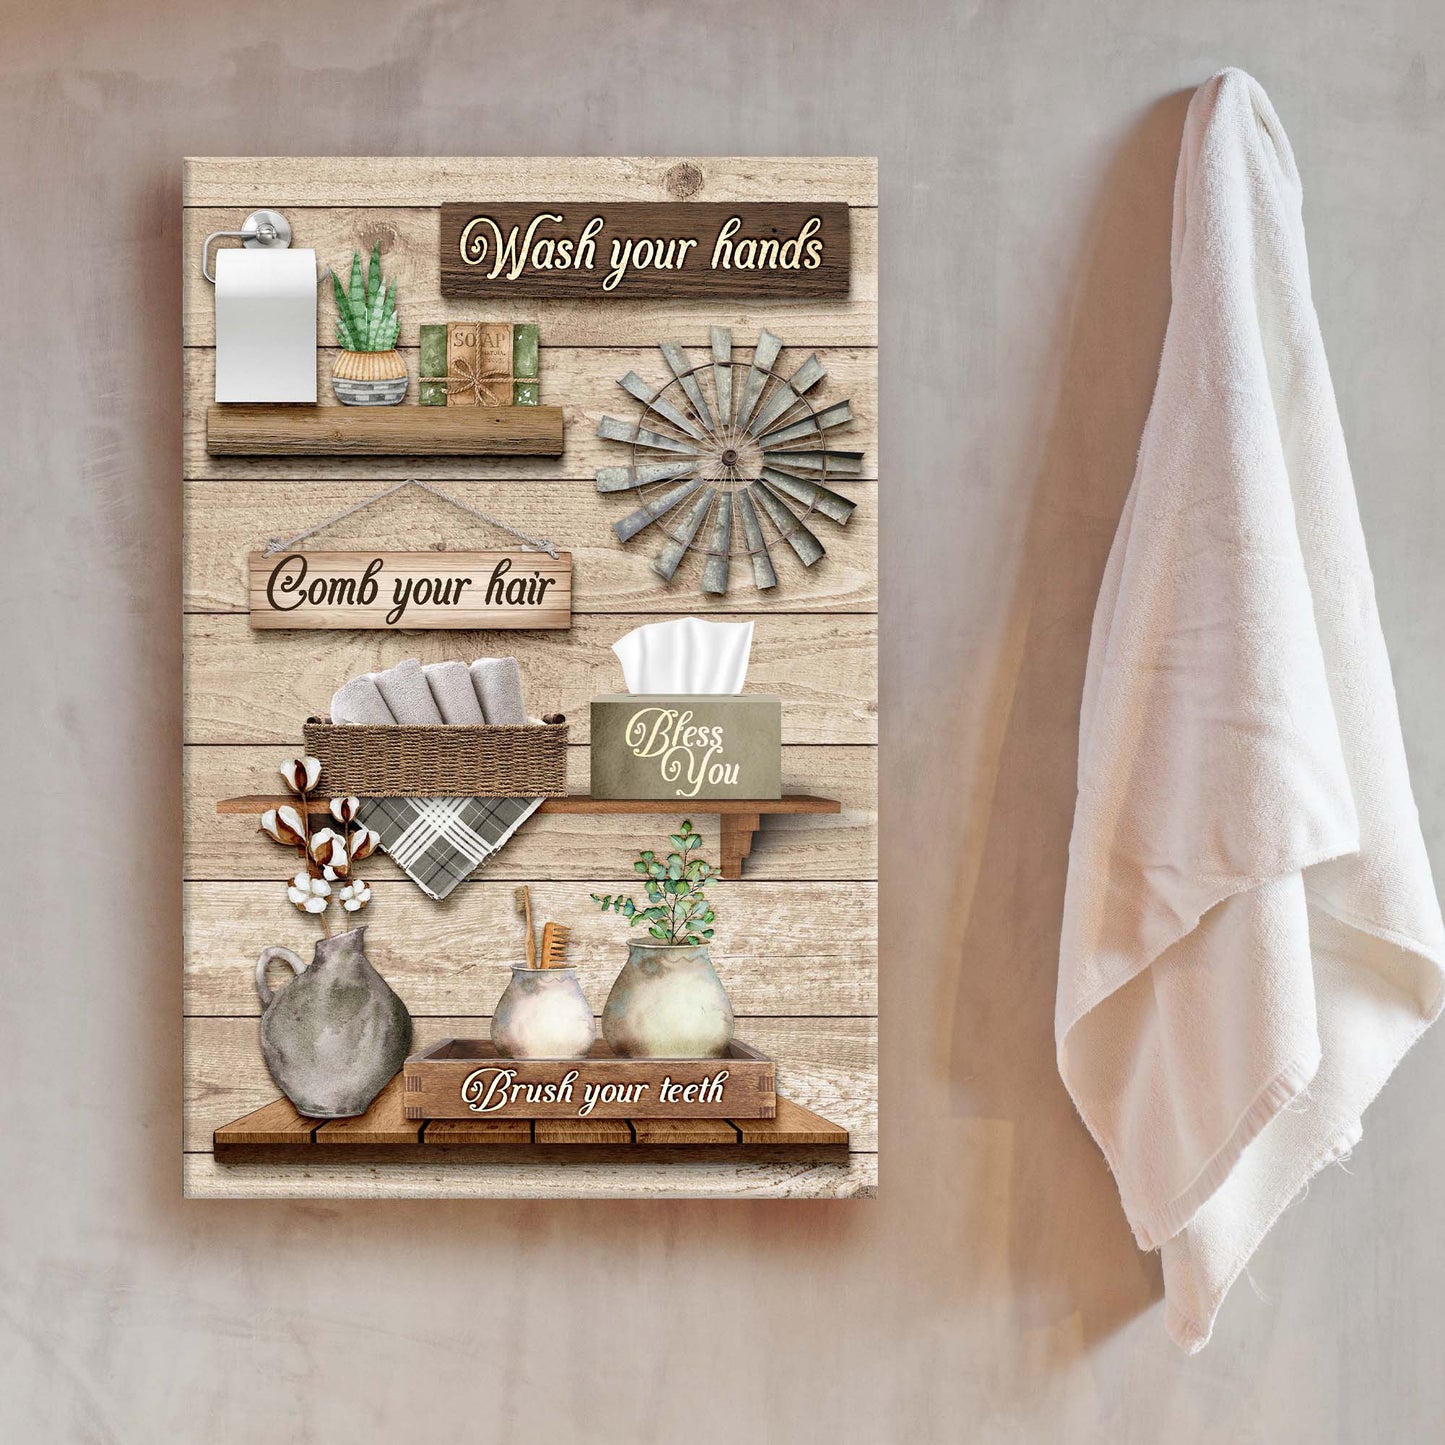 Wash Your Hands Bathroom Sign  - Image by Tailored Canvases